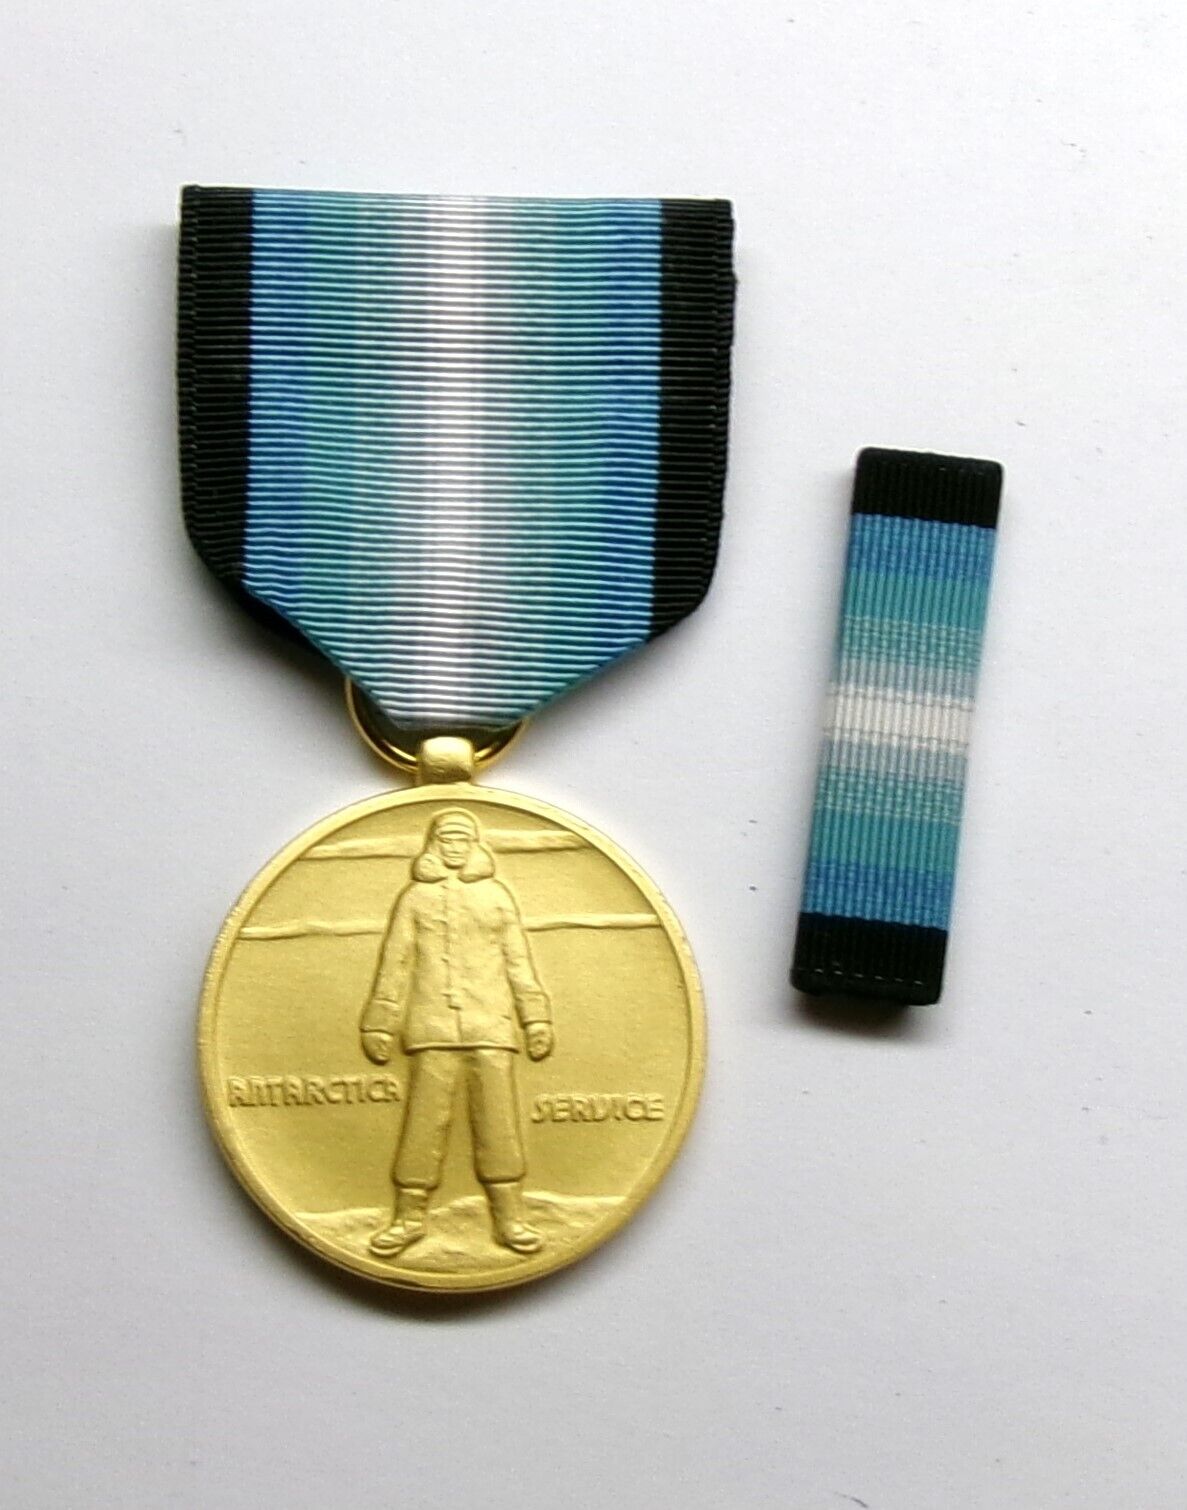 Antarctica Service  Military Medal with RIBBON